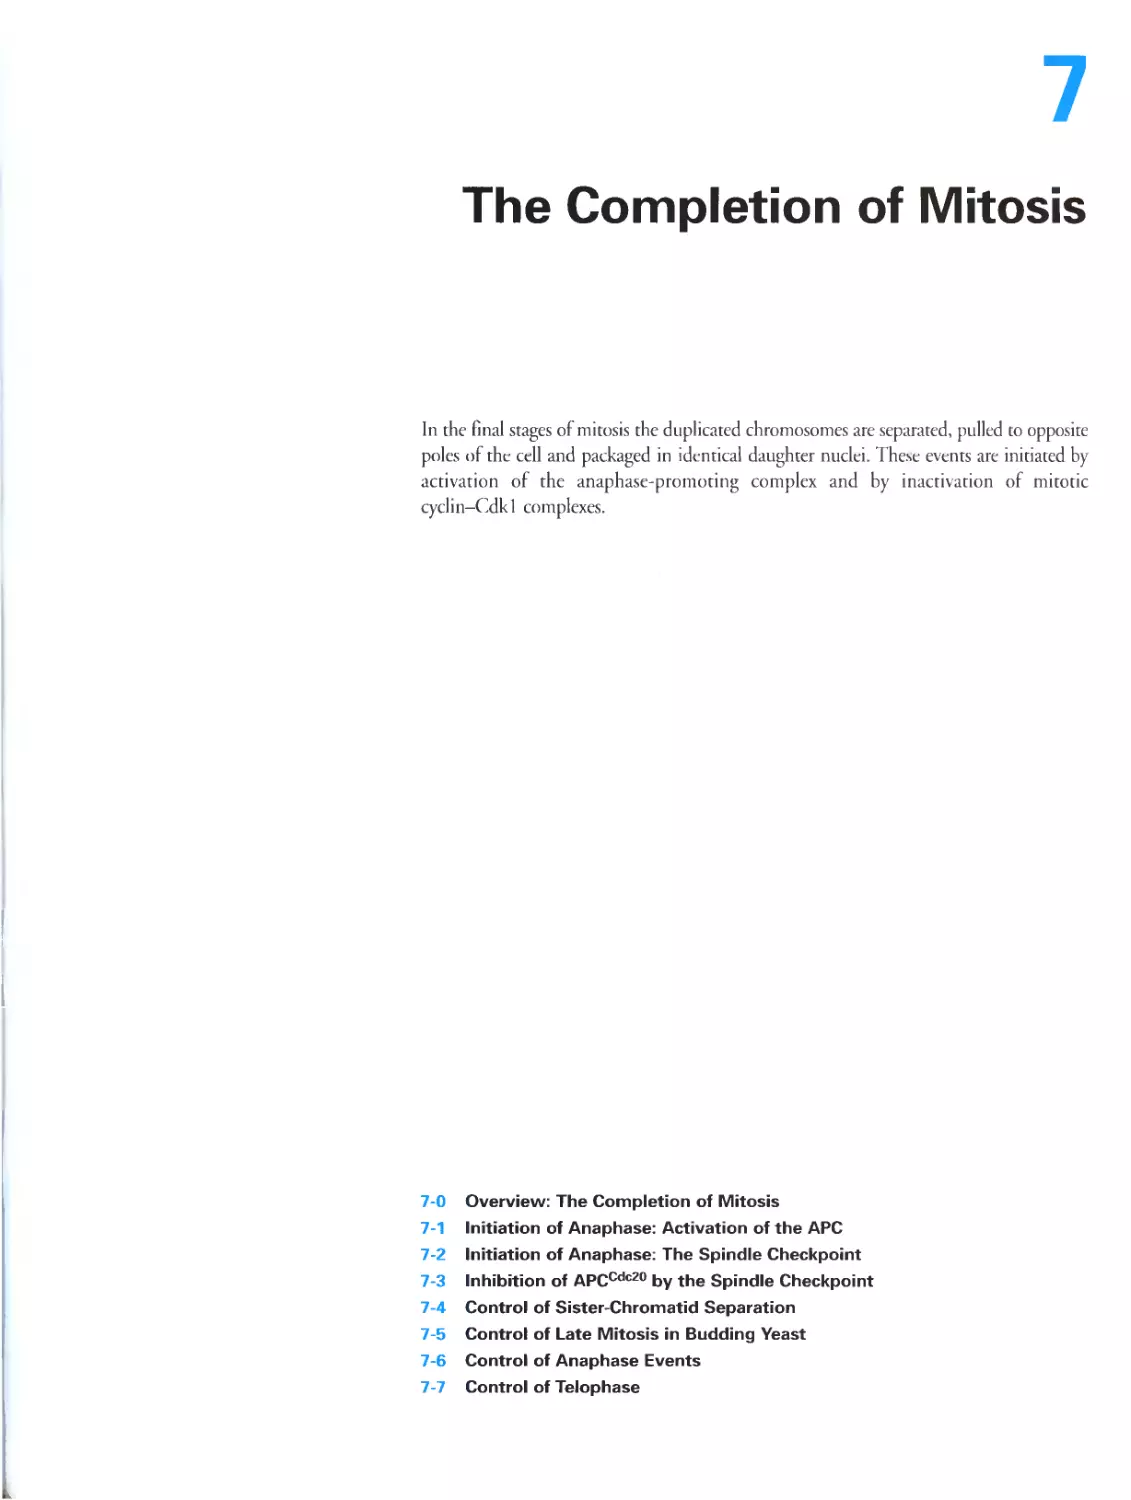 Chapter 7. The Completion of Mitosis